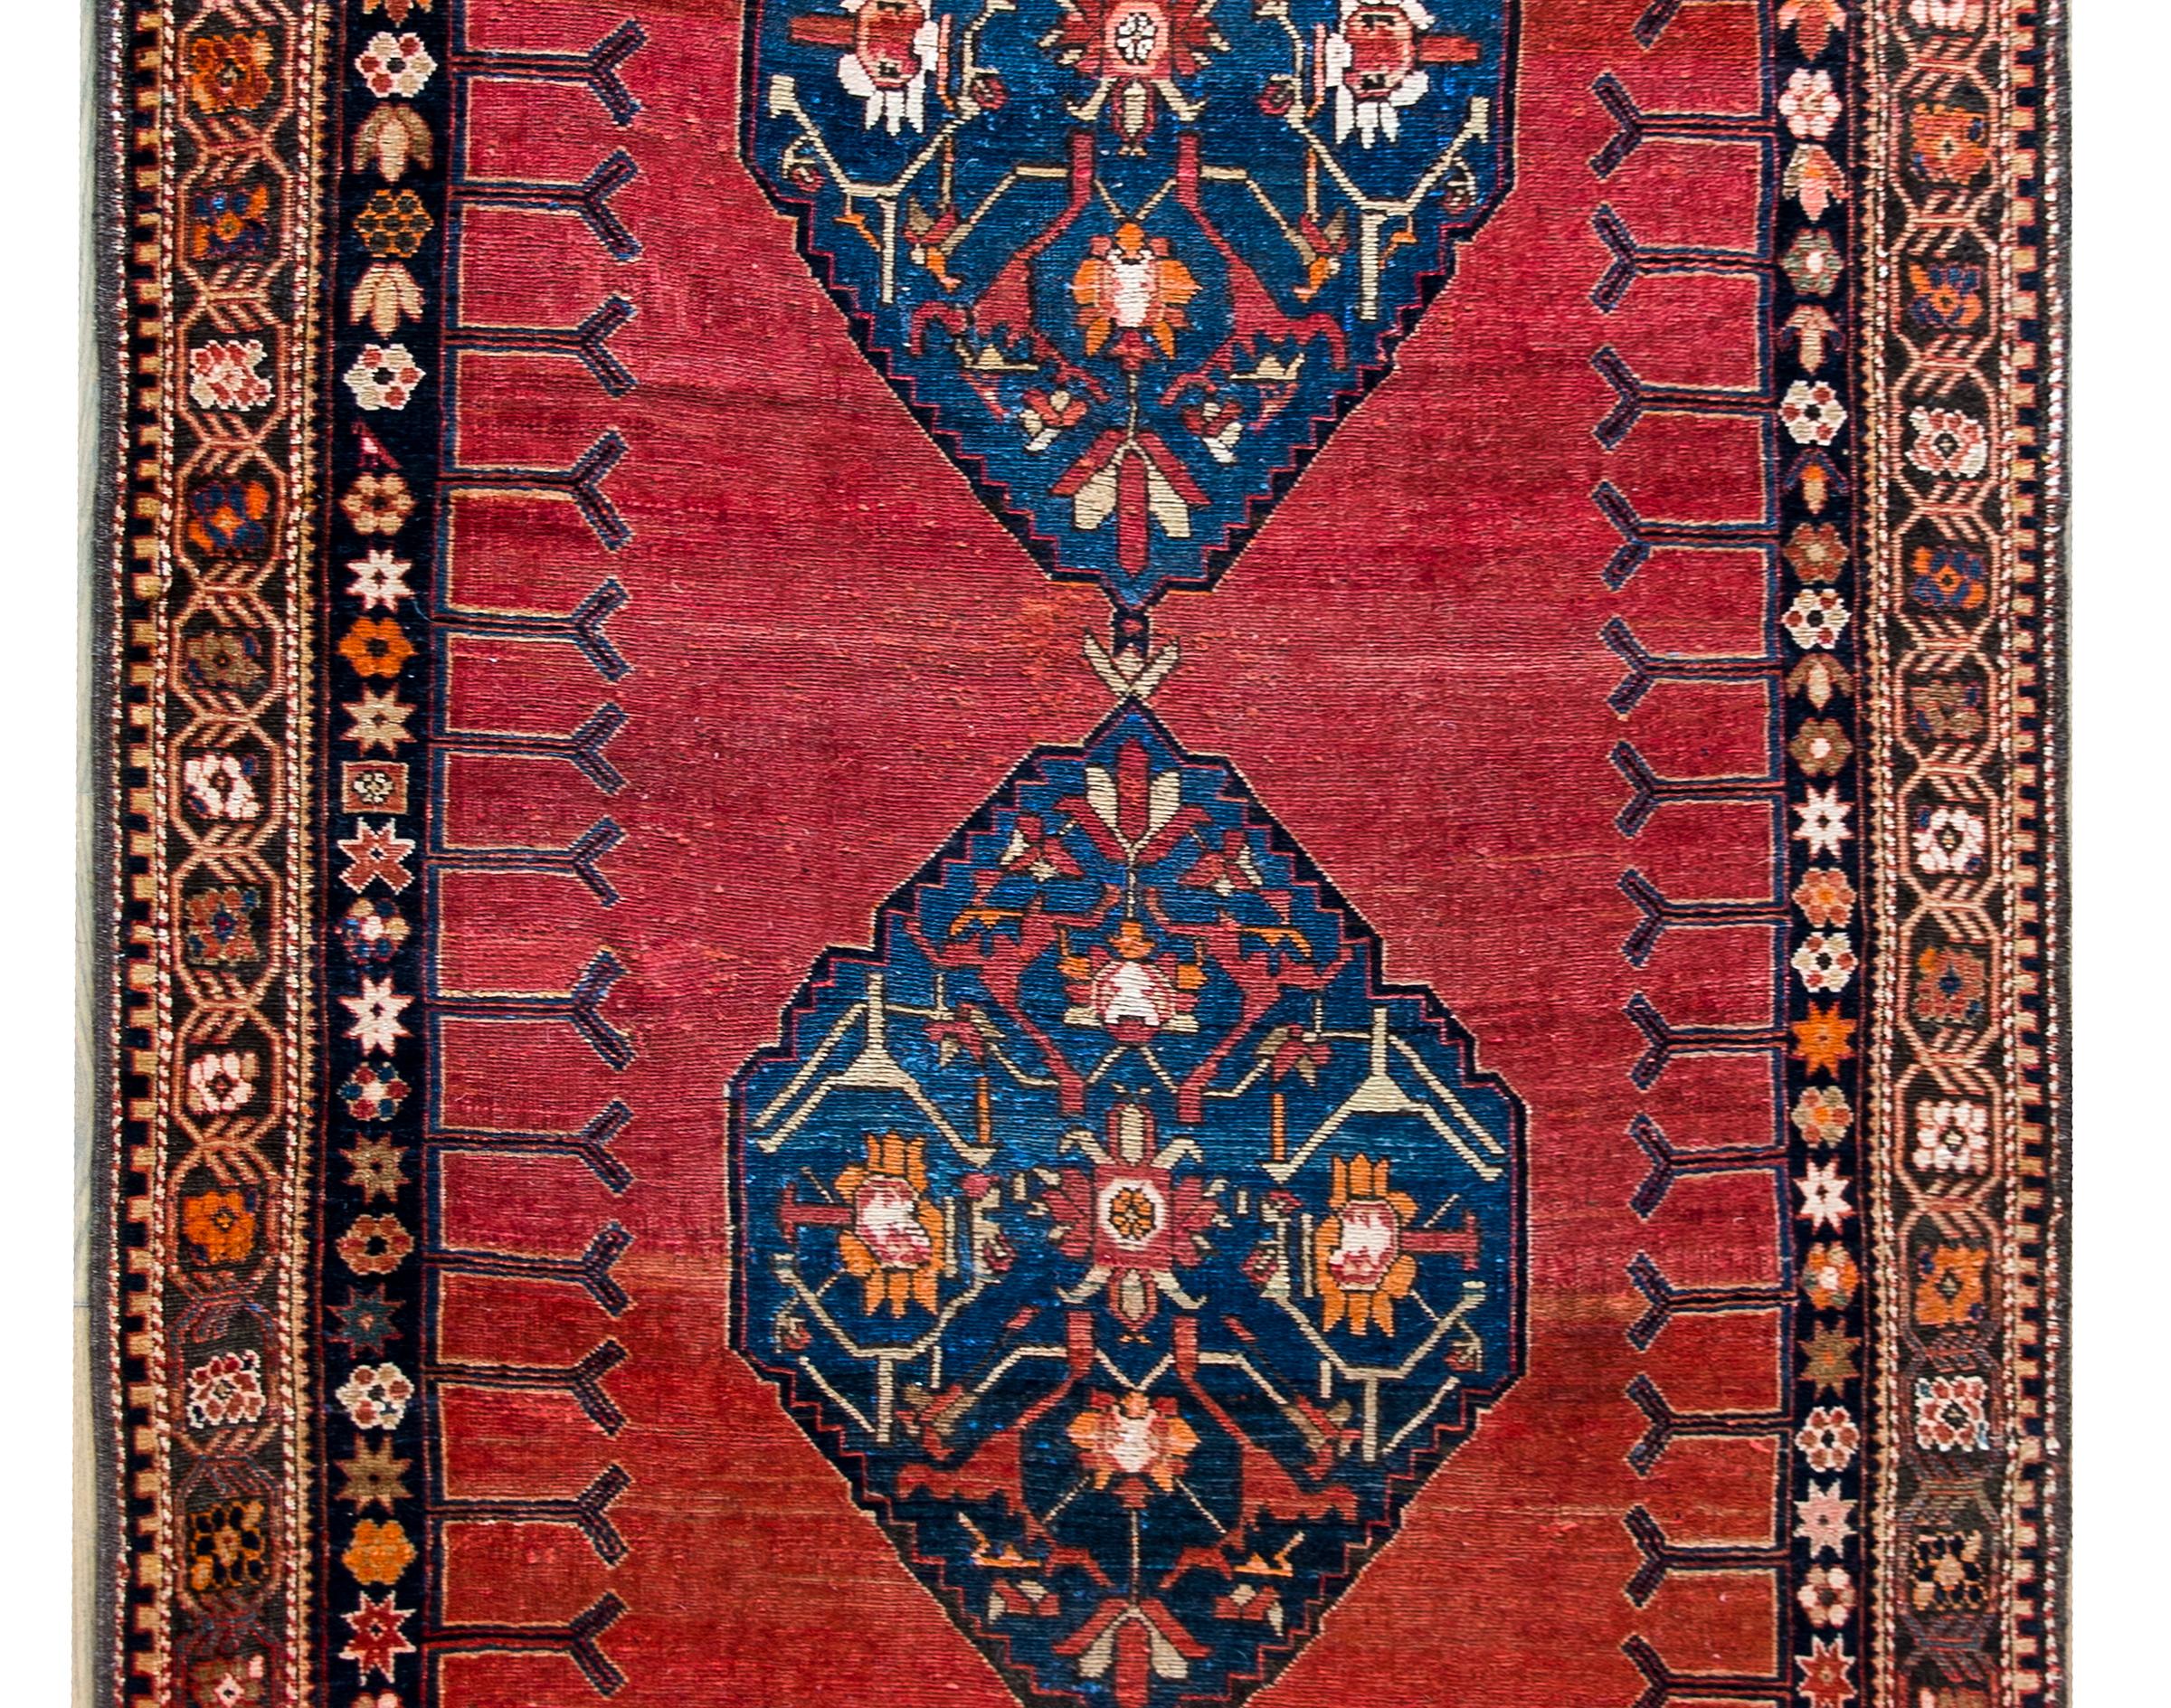 One of the most beautiful rugs we've seen in a long time!  A stunning late 19th century Karabakh rug with three large indigo medallions each with stylized flowers and scrolling vines on a gorgeous abrash crimson and orange ground.  The border is